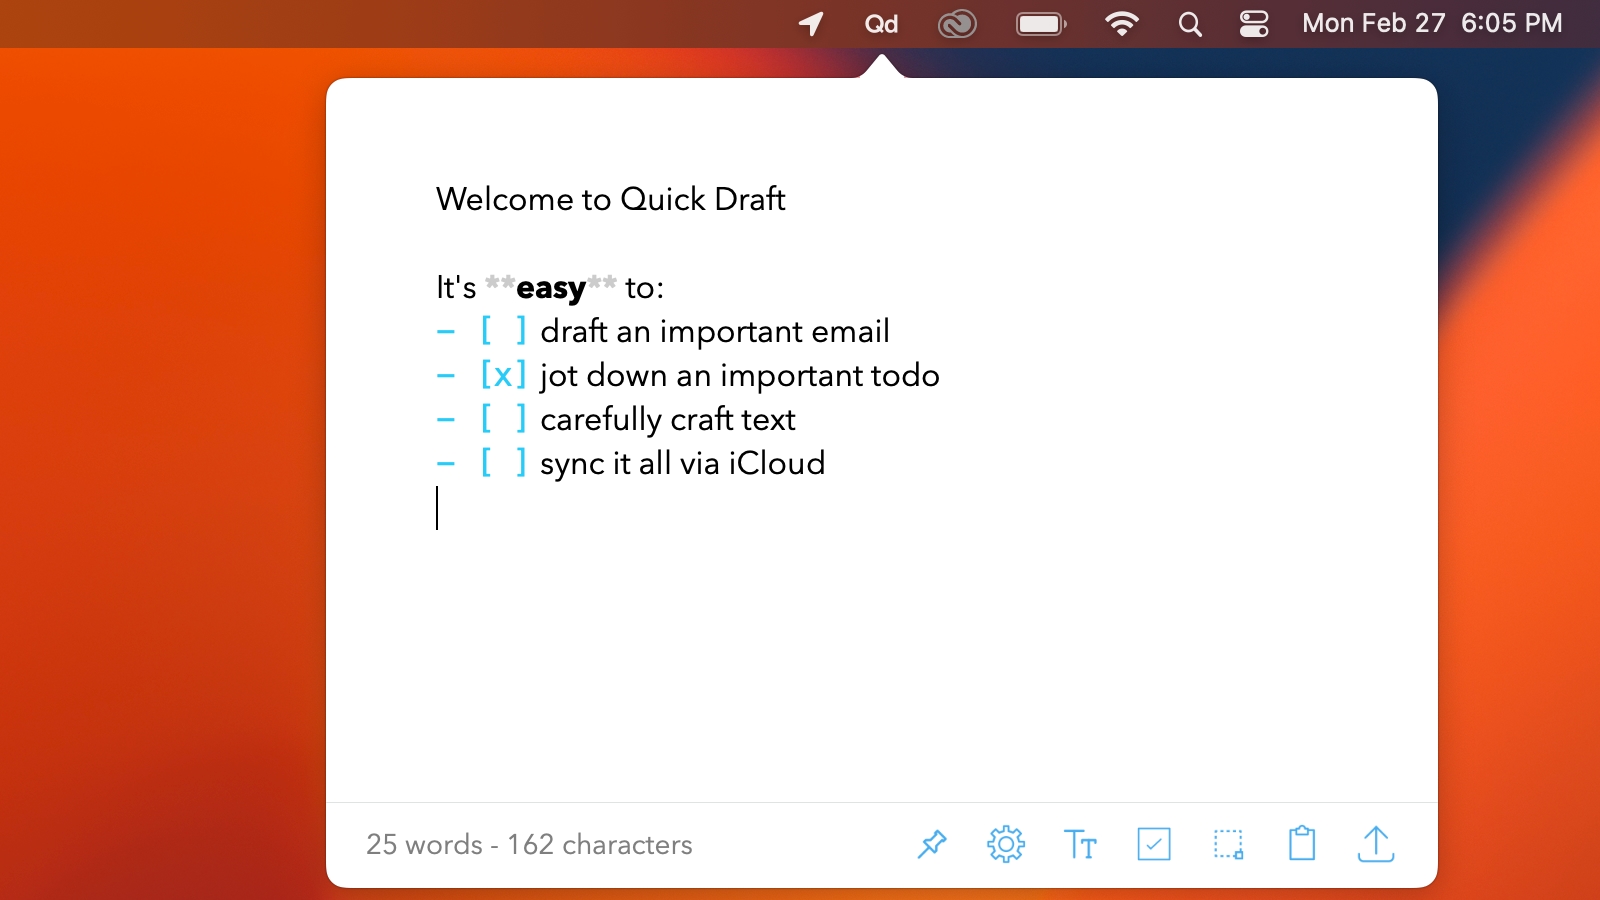 Quick Draft is a simple scratchpad for ephemeral notes with Markdown support